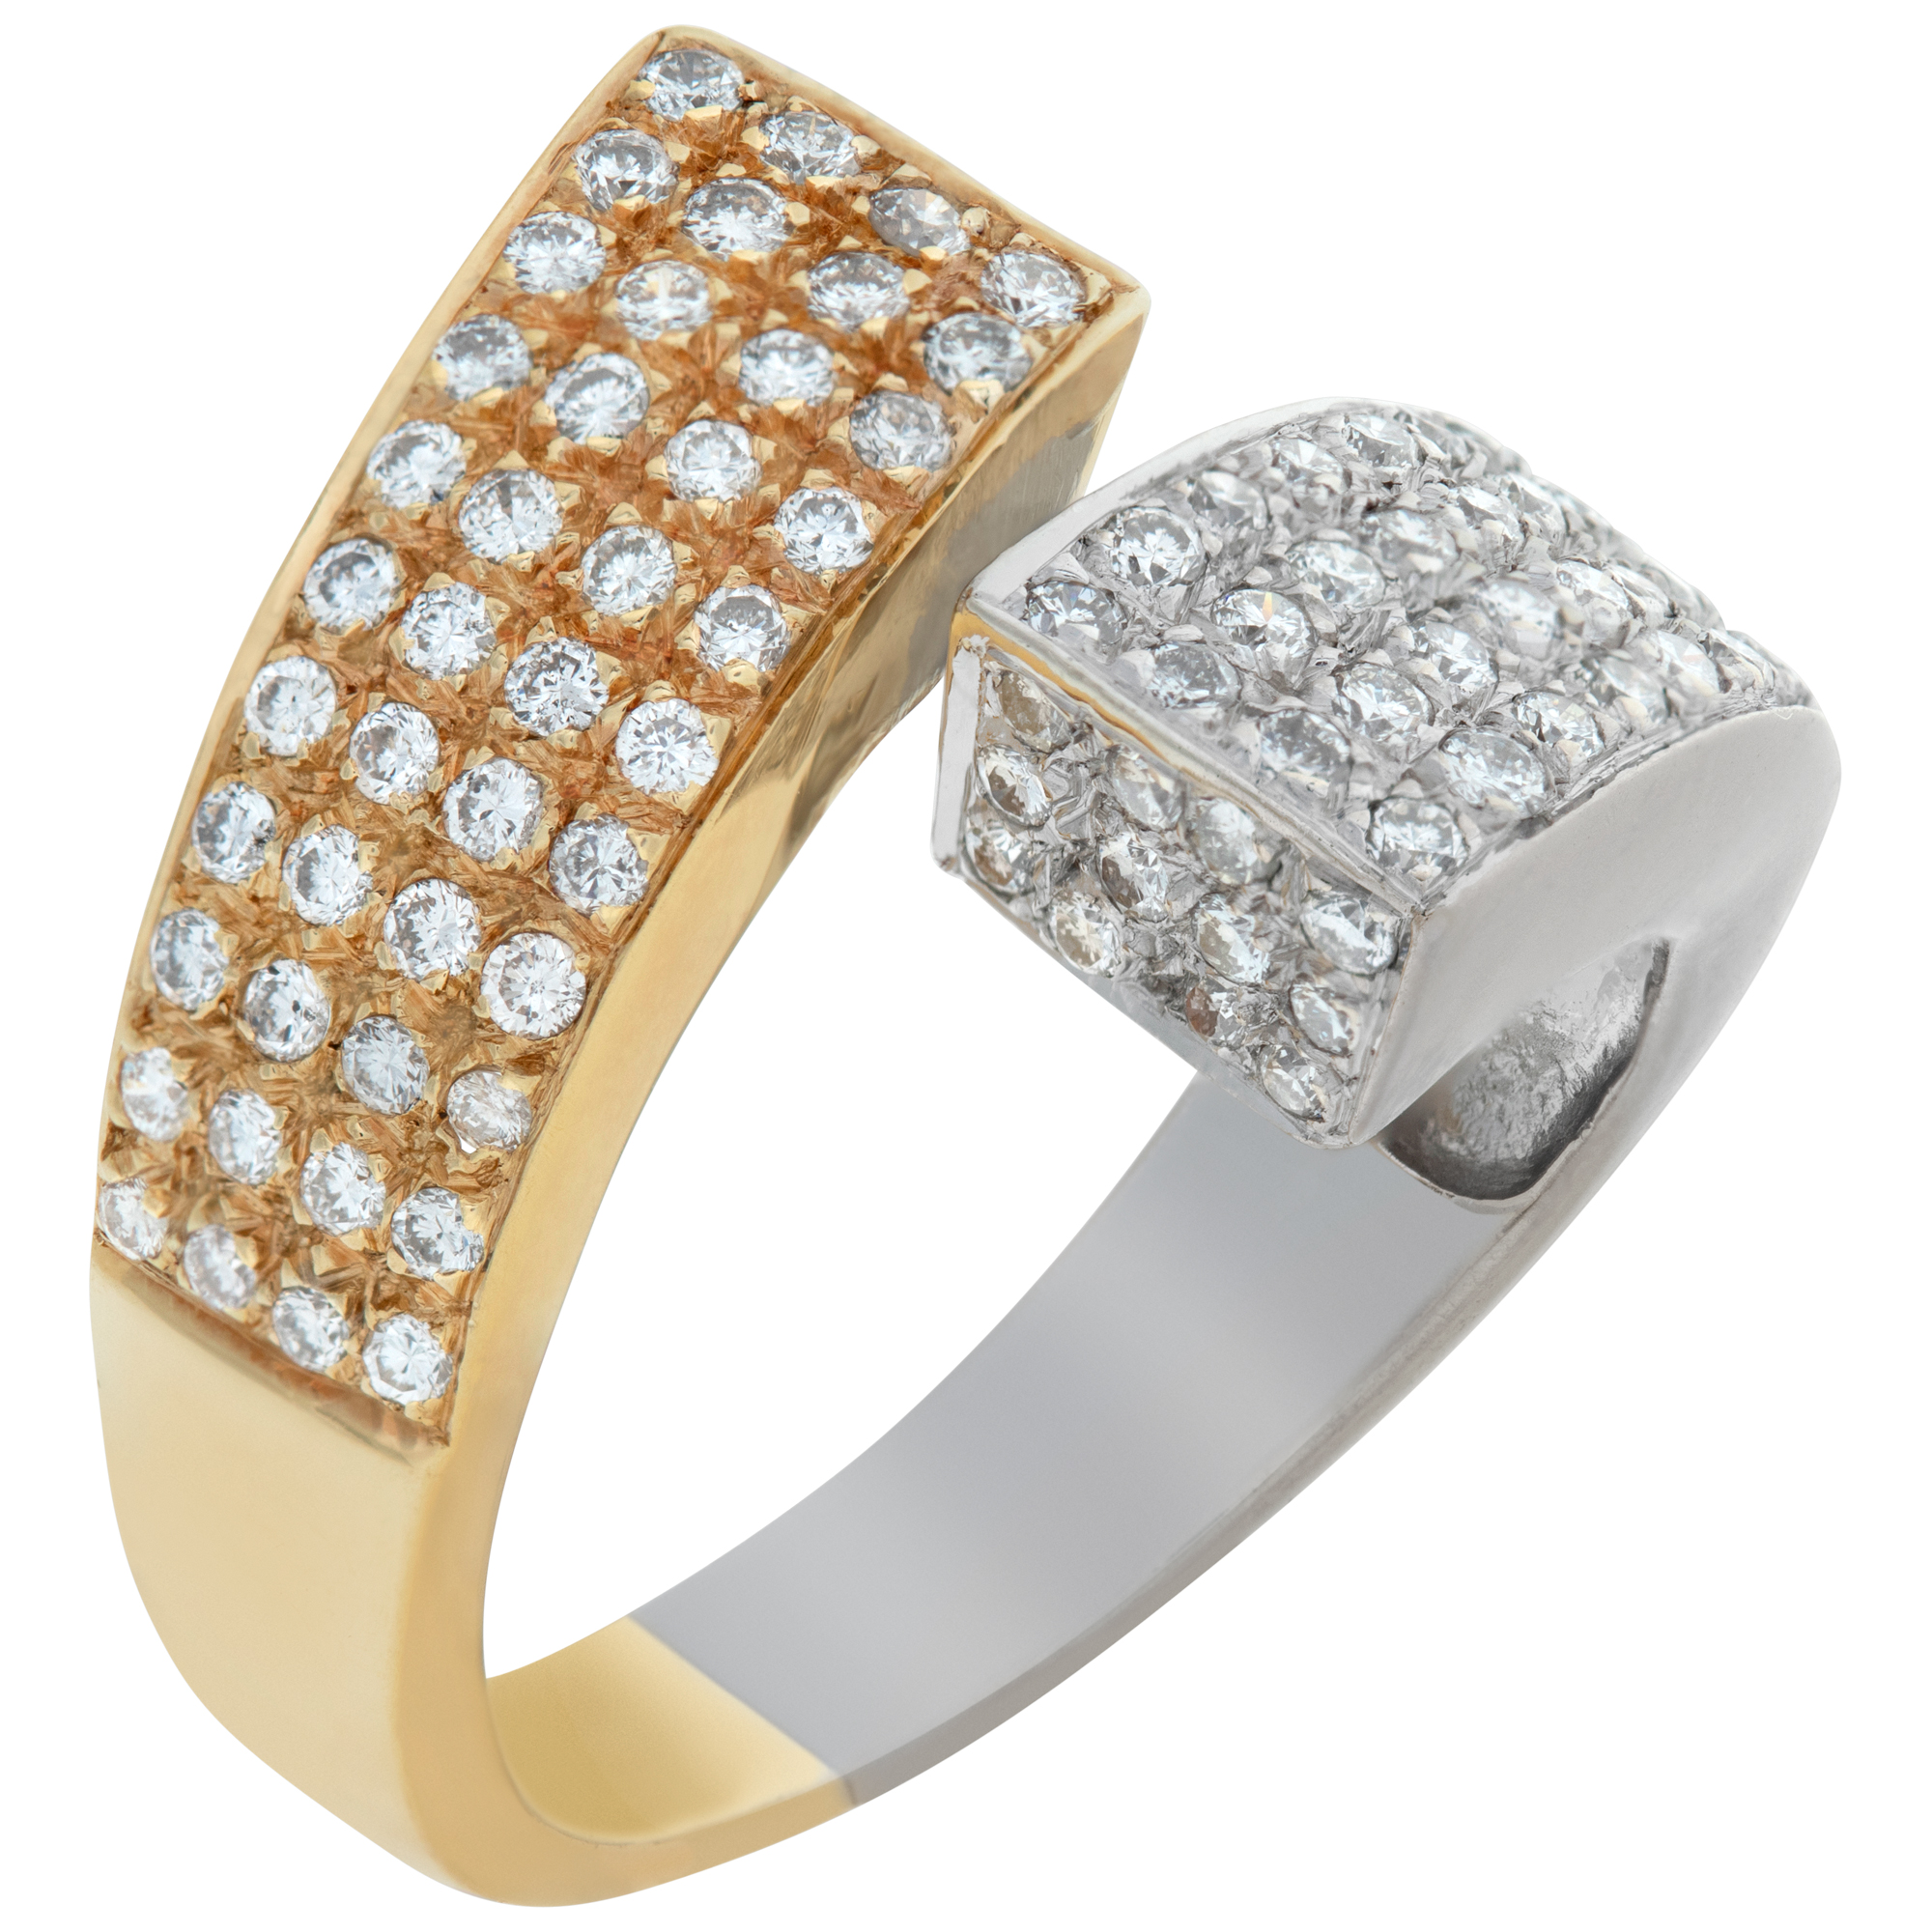 Sparkling diamond ring in 18k white & yellow gold. 1.40cts in diamonds. Size.6 image 3